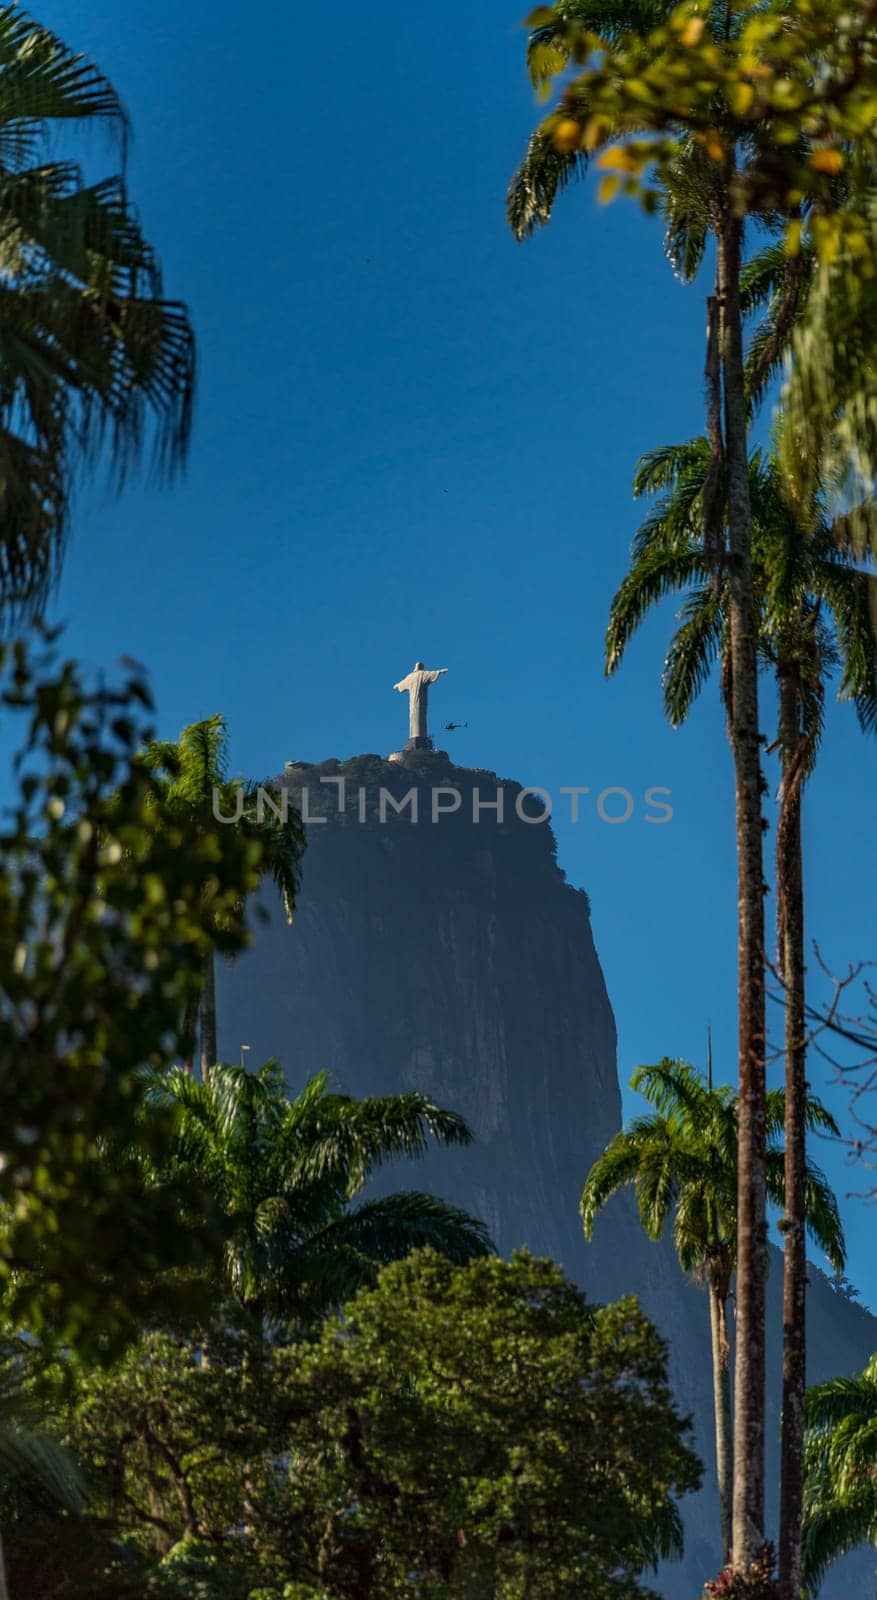 Tropical Landscape with Iconic Statue Under Clear Blue Sky by FerradalFCG